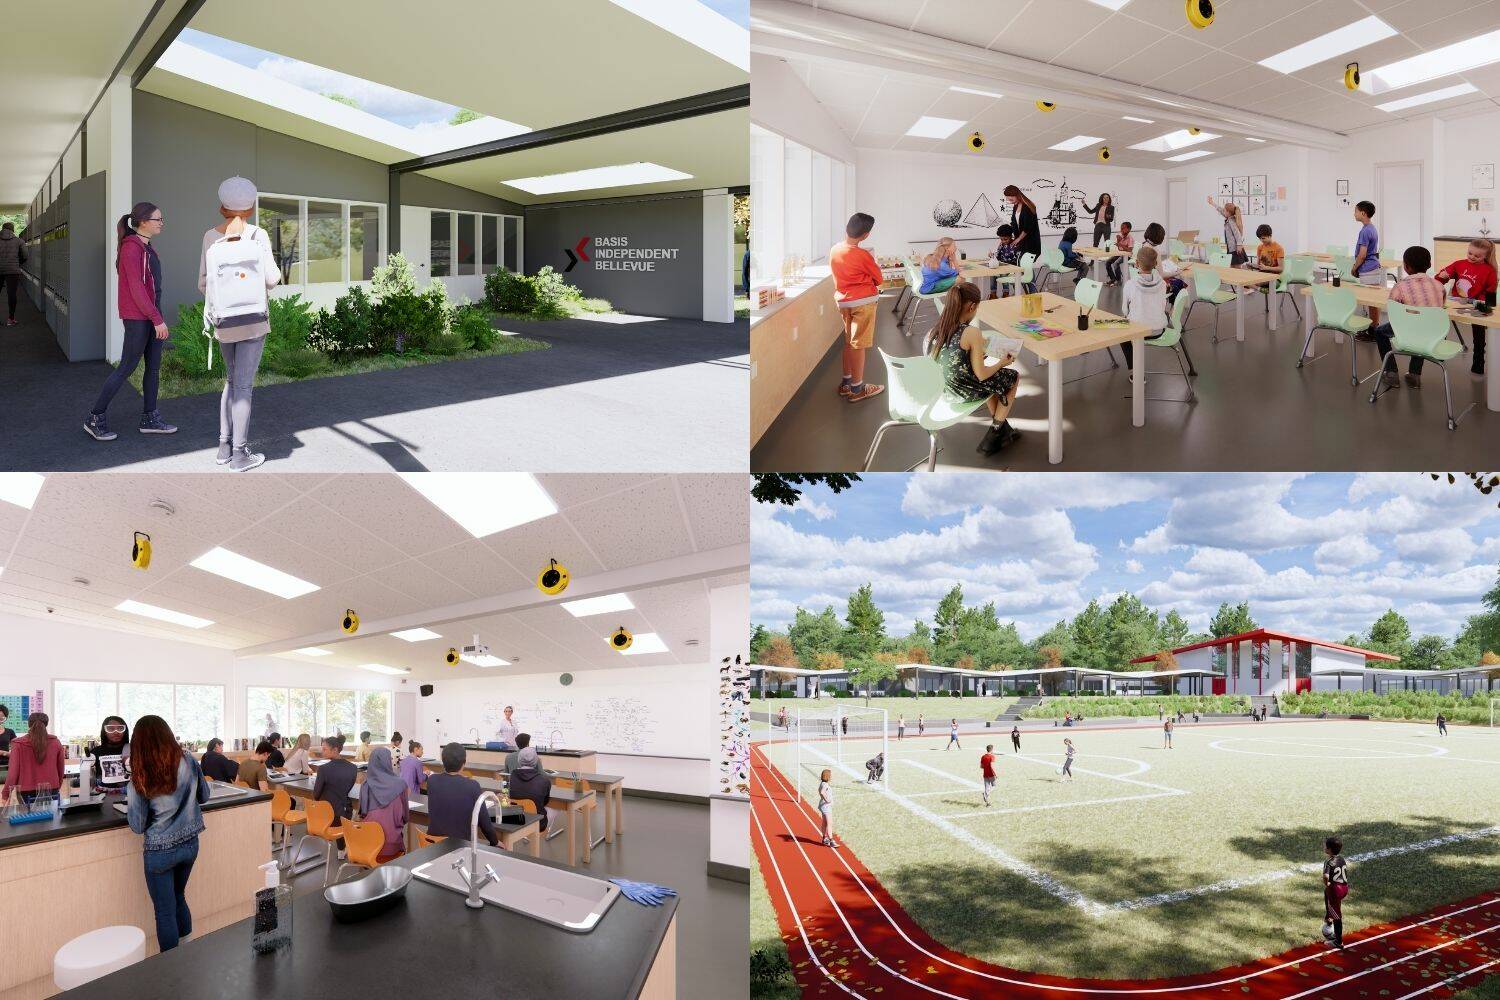 Artist rendering of new school classrooms and amenities (courtesy of BASIS Independent Bellevue)